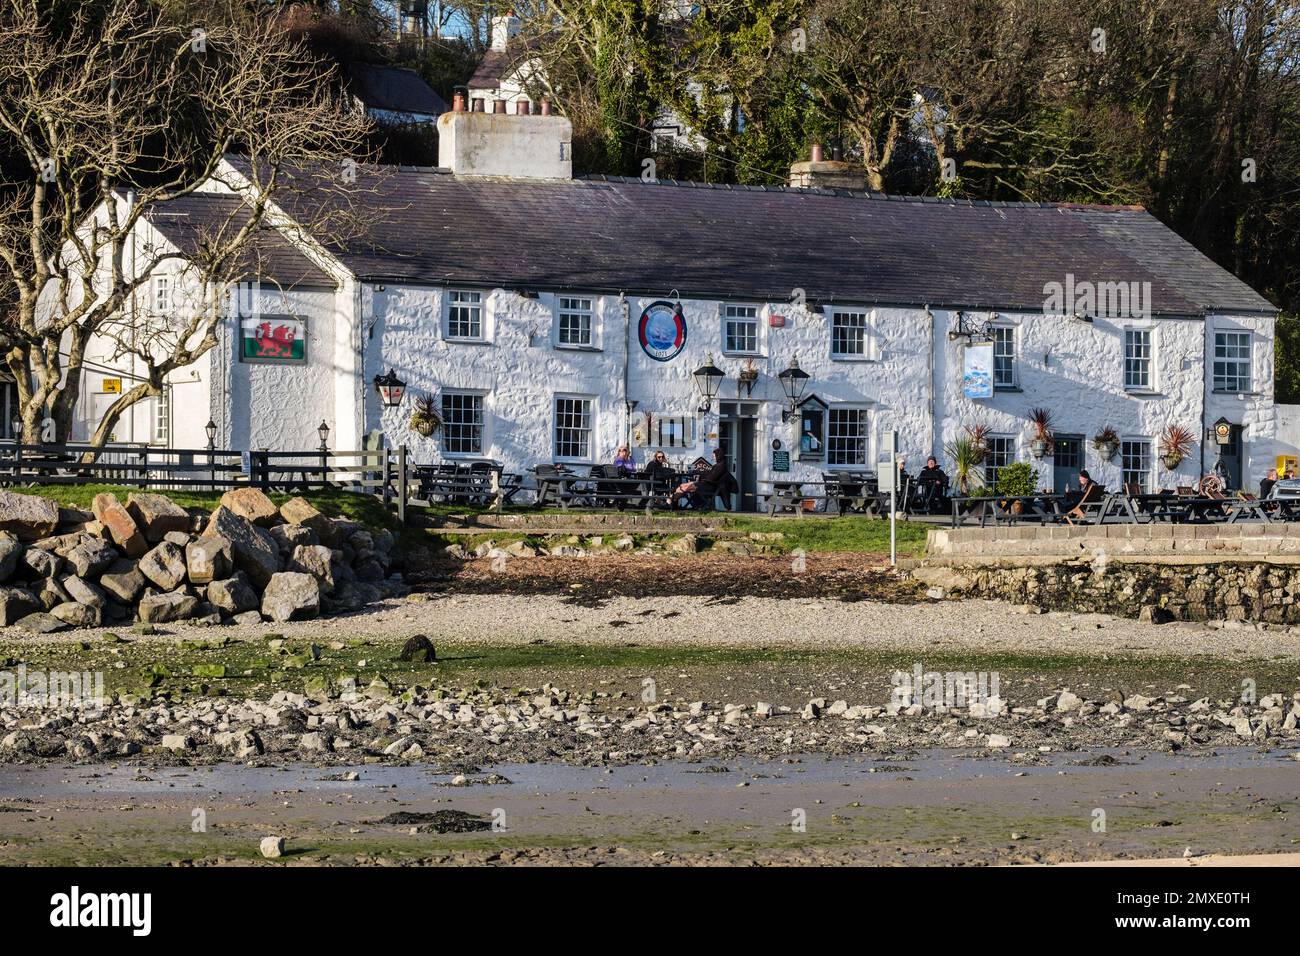 The Ship Inn is an 18th century pub on the seafront in Red Wharf Bay (Traeth Coch), Isle of Anglesey (Ynys Mon), Wales, UK, Britain Stock Photo